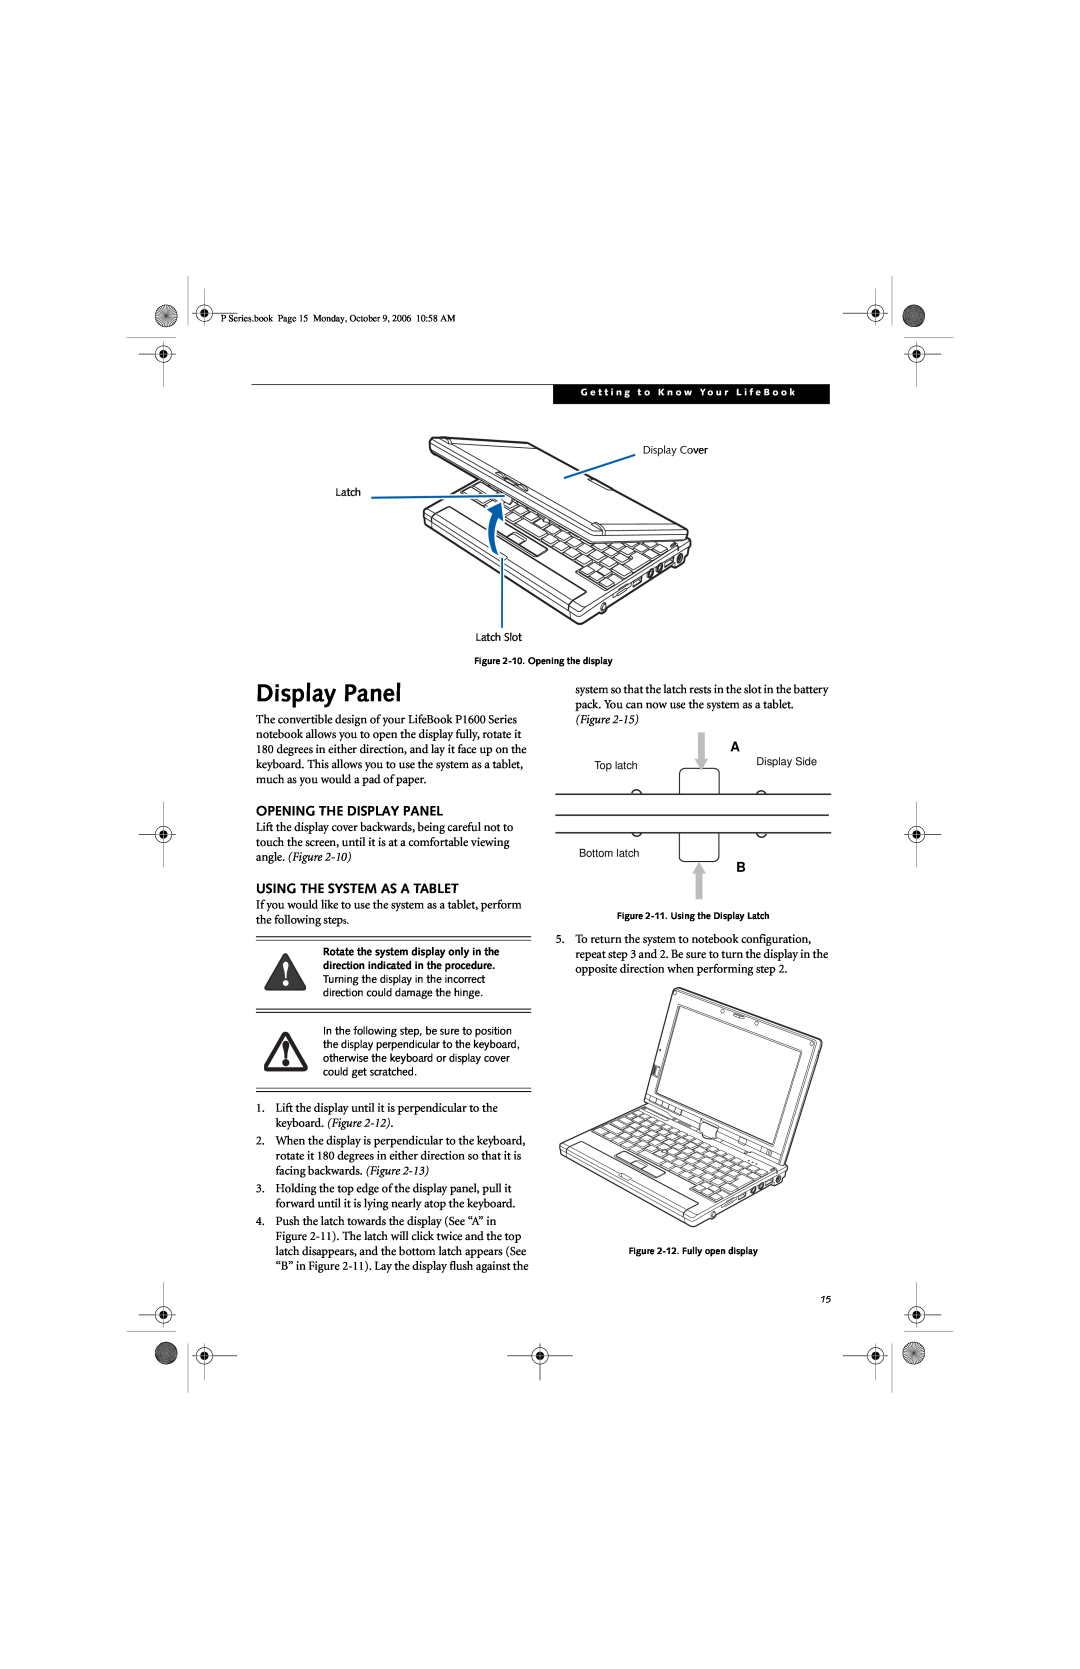 Fujitsu P1610 manual Opening The Display Panel, Using The System As A Tablet, angle. Figure 